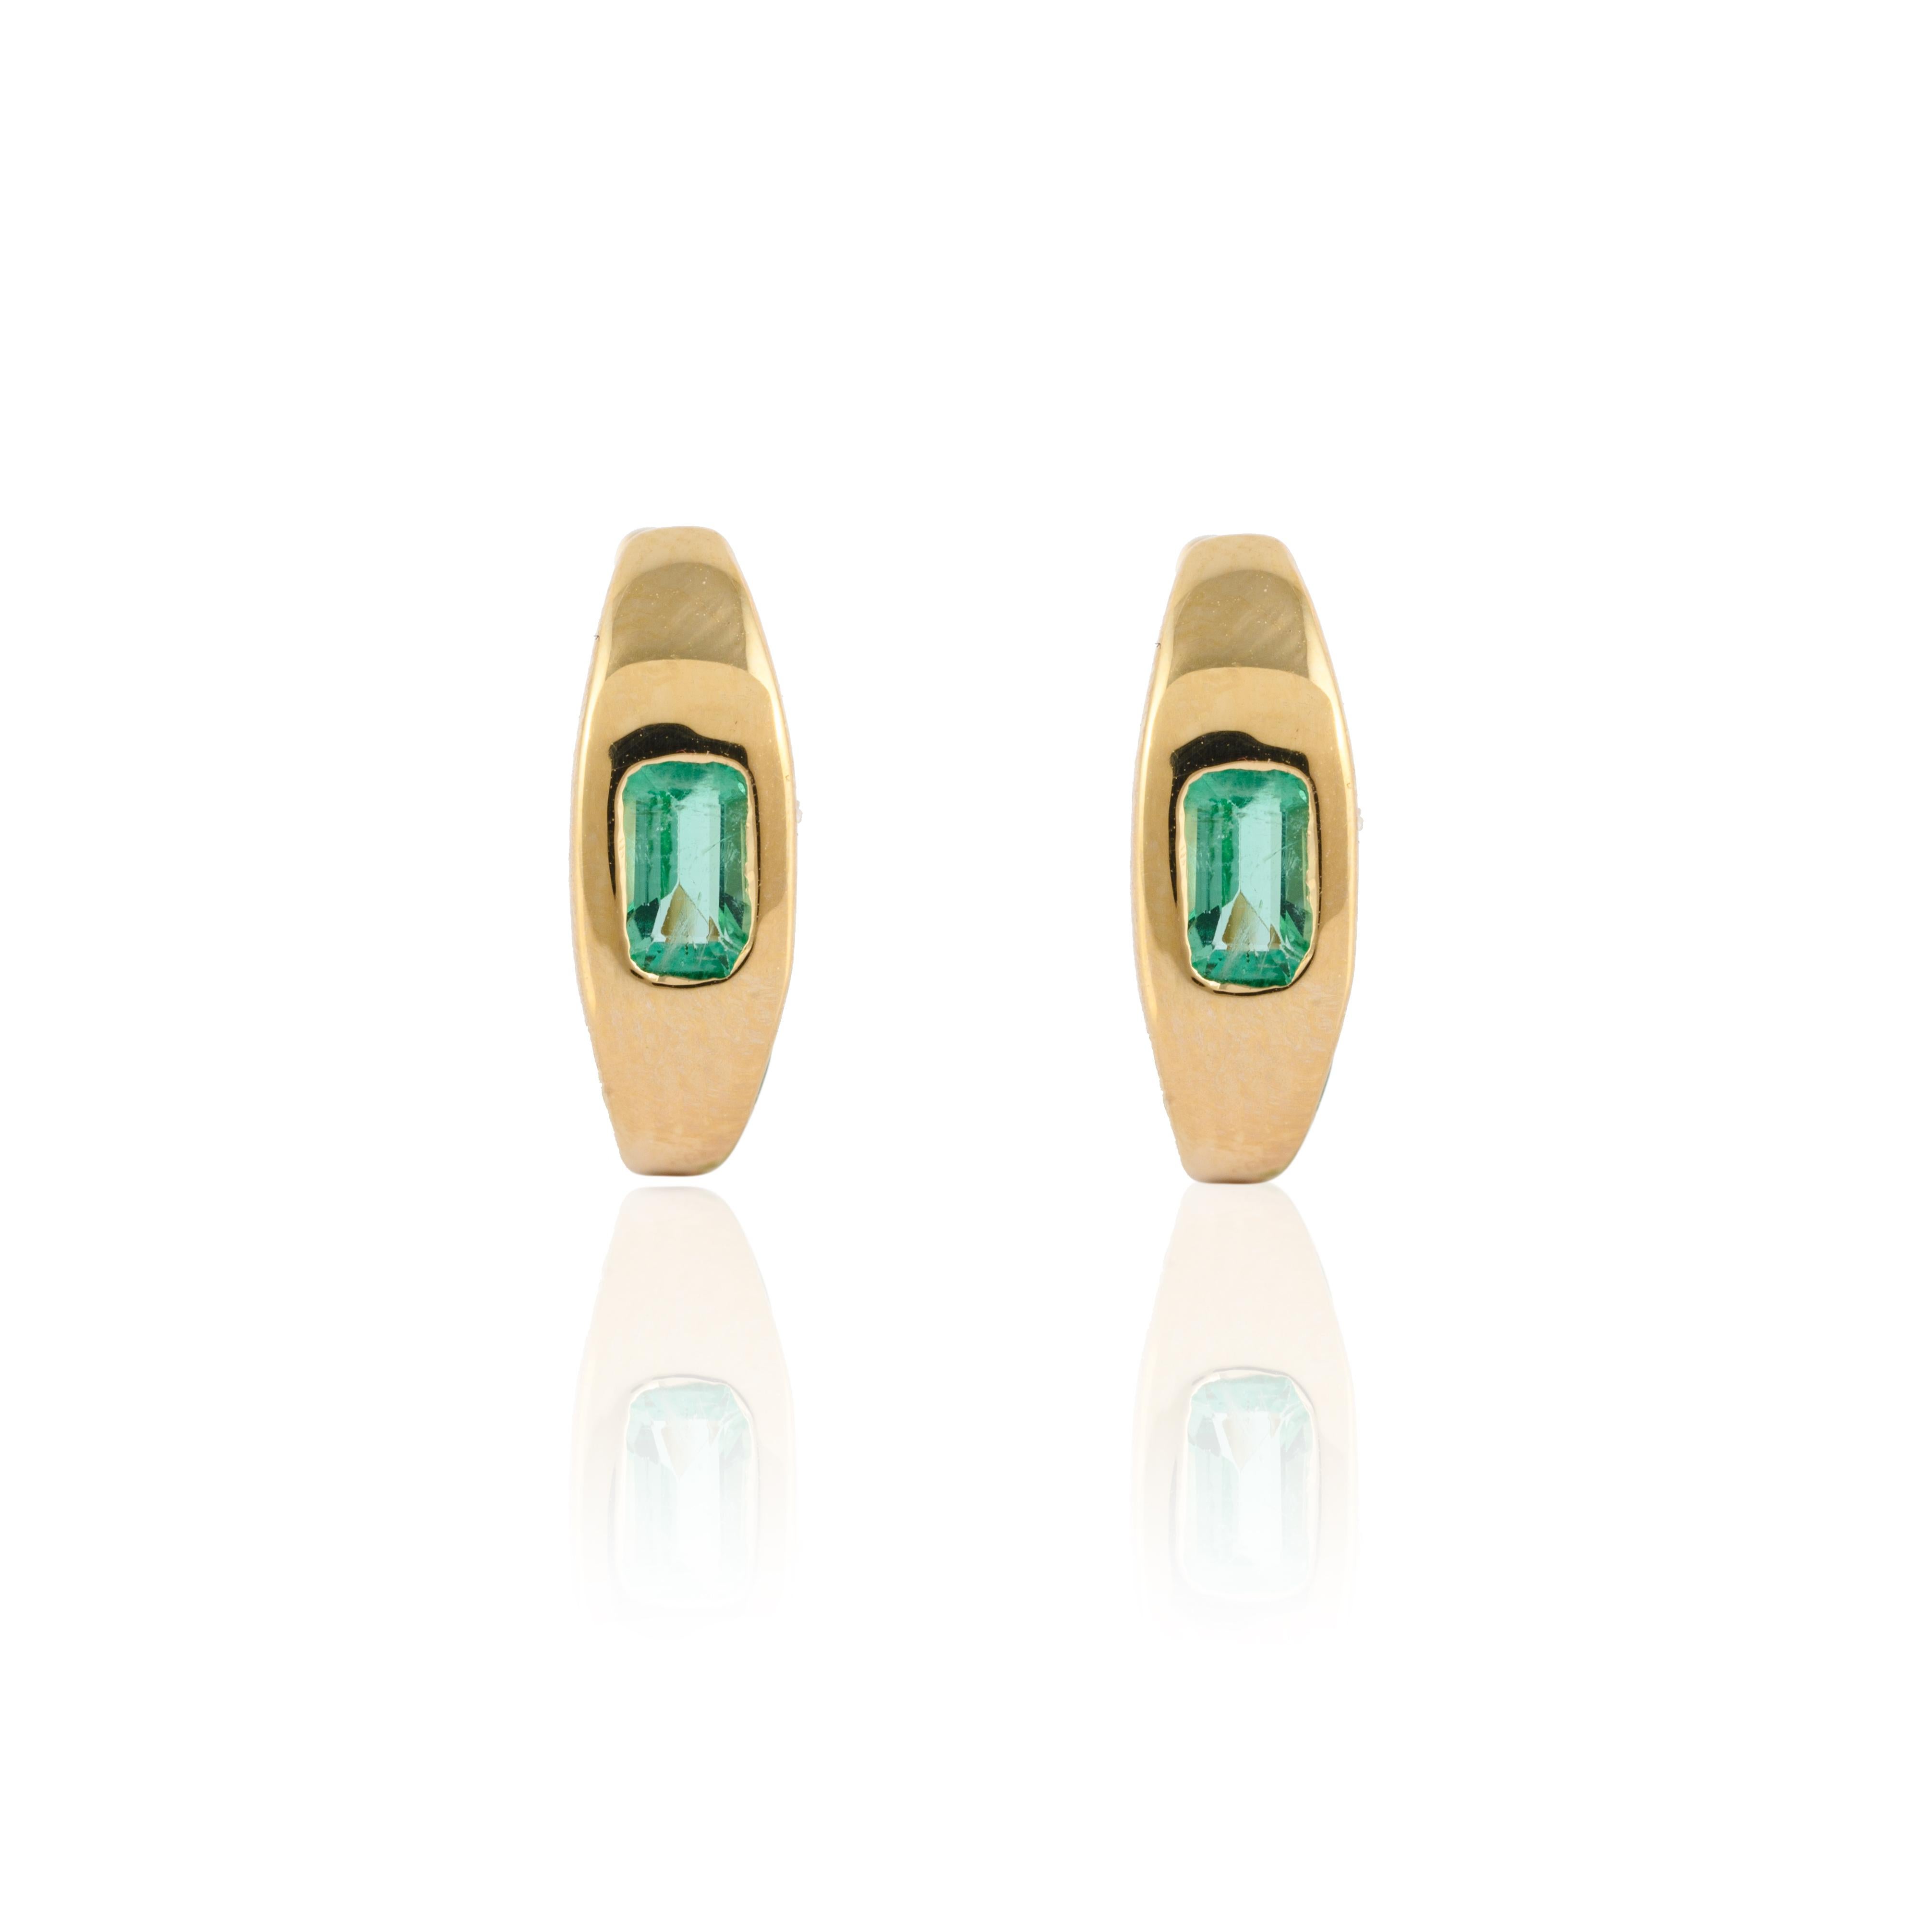 Minimalist Emerald Studded Huggie Earrings in 14K Gold to make a statement with your look. You shall need small huggie office earrings to make a statement with your look. These earrings create a sparkling, luxurious look featuring baguette cut